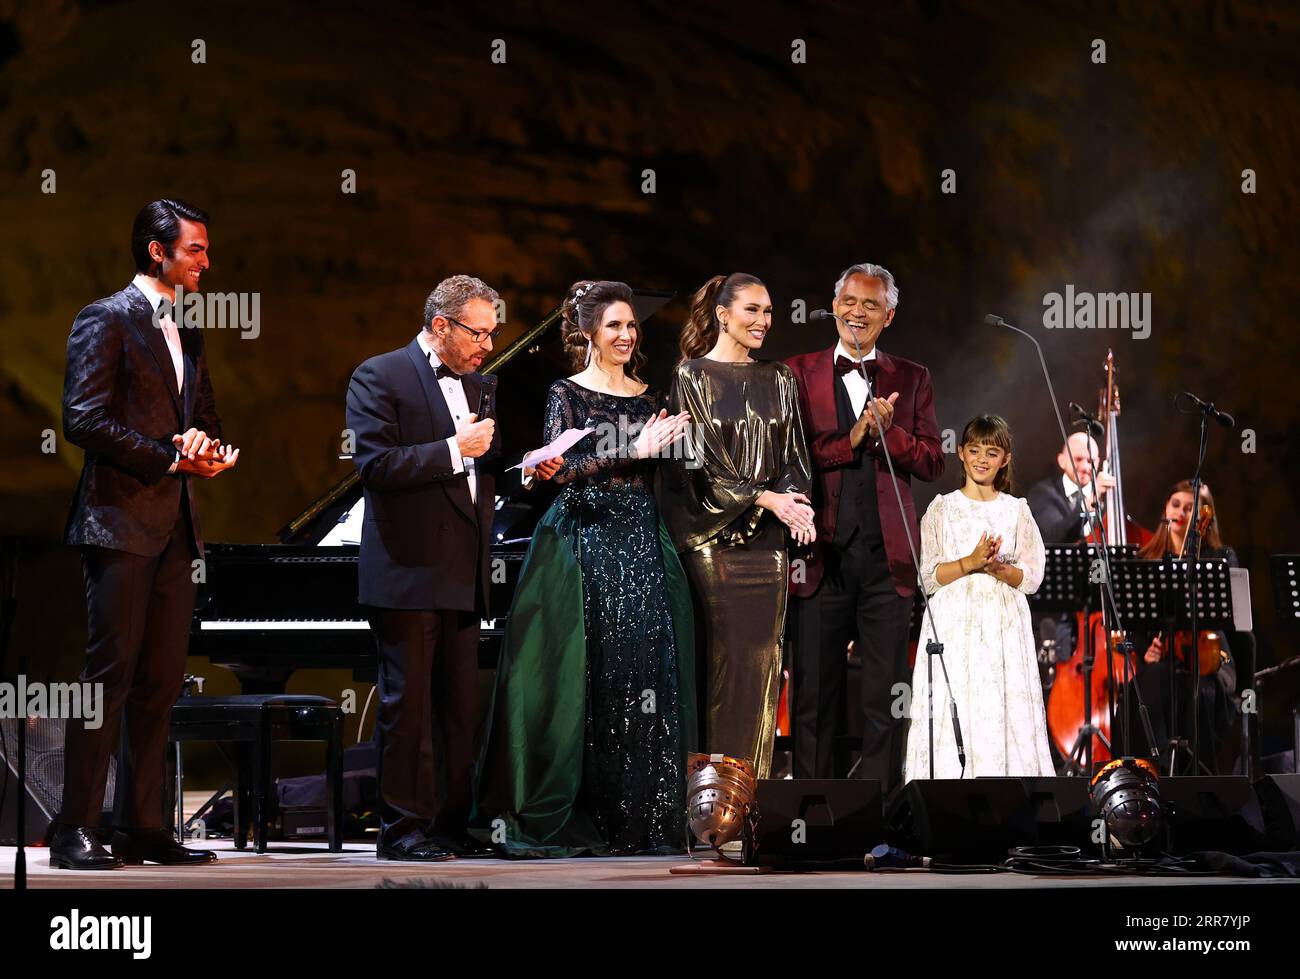 210409 -- AL ULA, April 9, 2021 -- Italian tenor Andrea Bocelli, joined by many musicians, performs at a concert in Al-Ula, northwestern Saudi Arabia, April 8, 2021. The Italian legendary tenor Andrea Bocelli on Thursday evening performed within the walls of Hegra, Saudi Arabia s first UNESCO World Heritage Site. TO GO WITH Italian tenor Bocelli performs in Saudi s world heritage site /Handout via Xinhua SAUDI ARABIA-AL ULA-ANDREA BOCELLI-CONCERT ThexRoyalxCommissionxforxAlUla PUBLICATIONxNOTxINxCHN Stock Photo